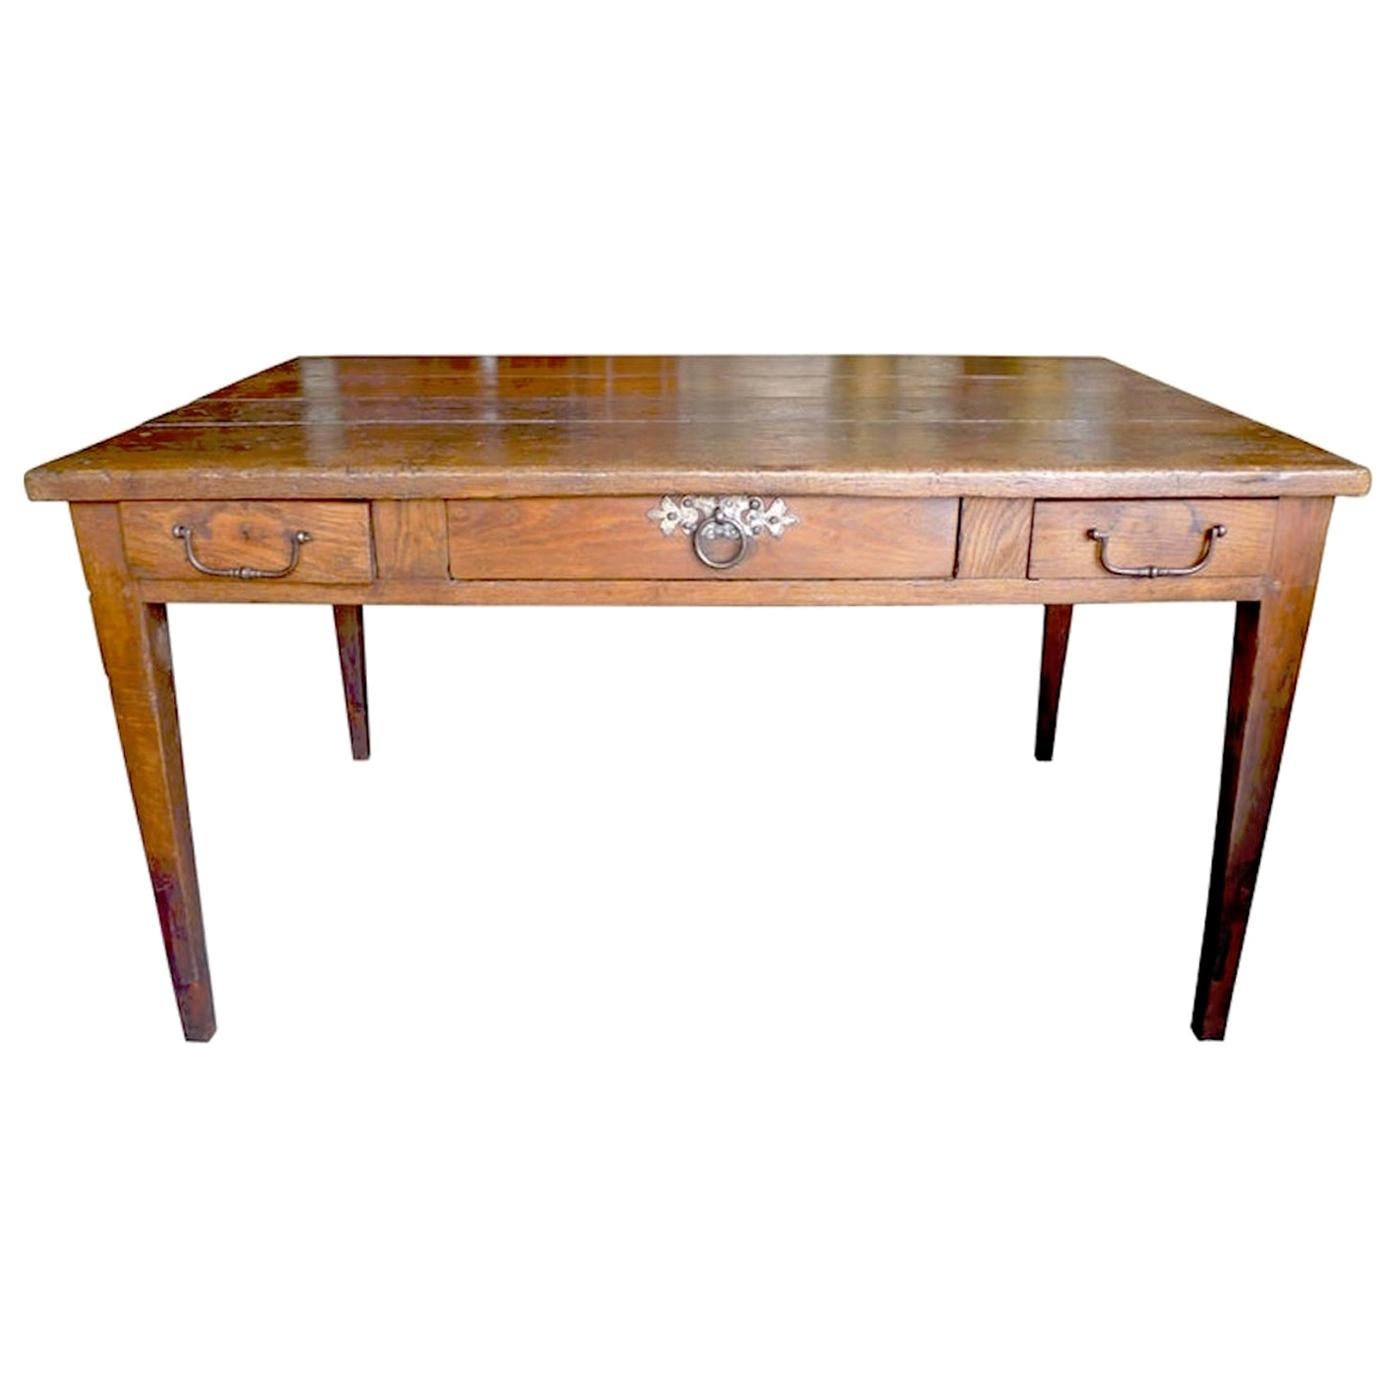 French XIX Walnut Dining Table or Desk with 3 Drawers and Original Hardware.